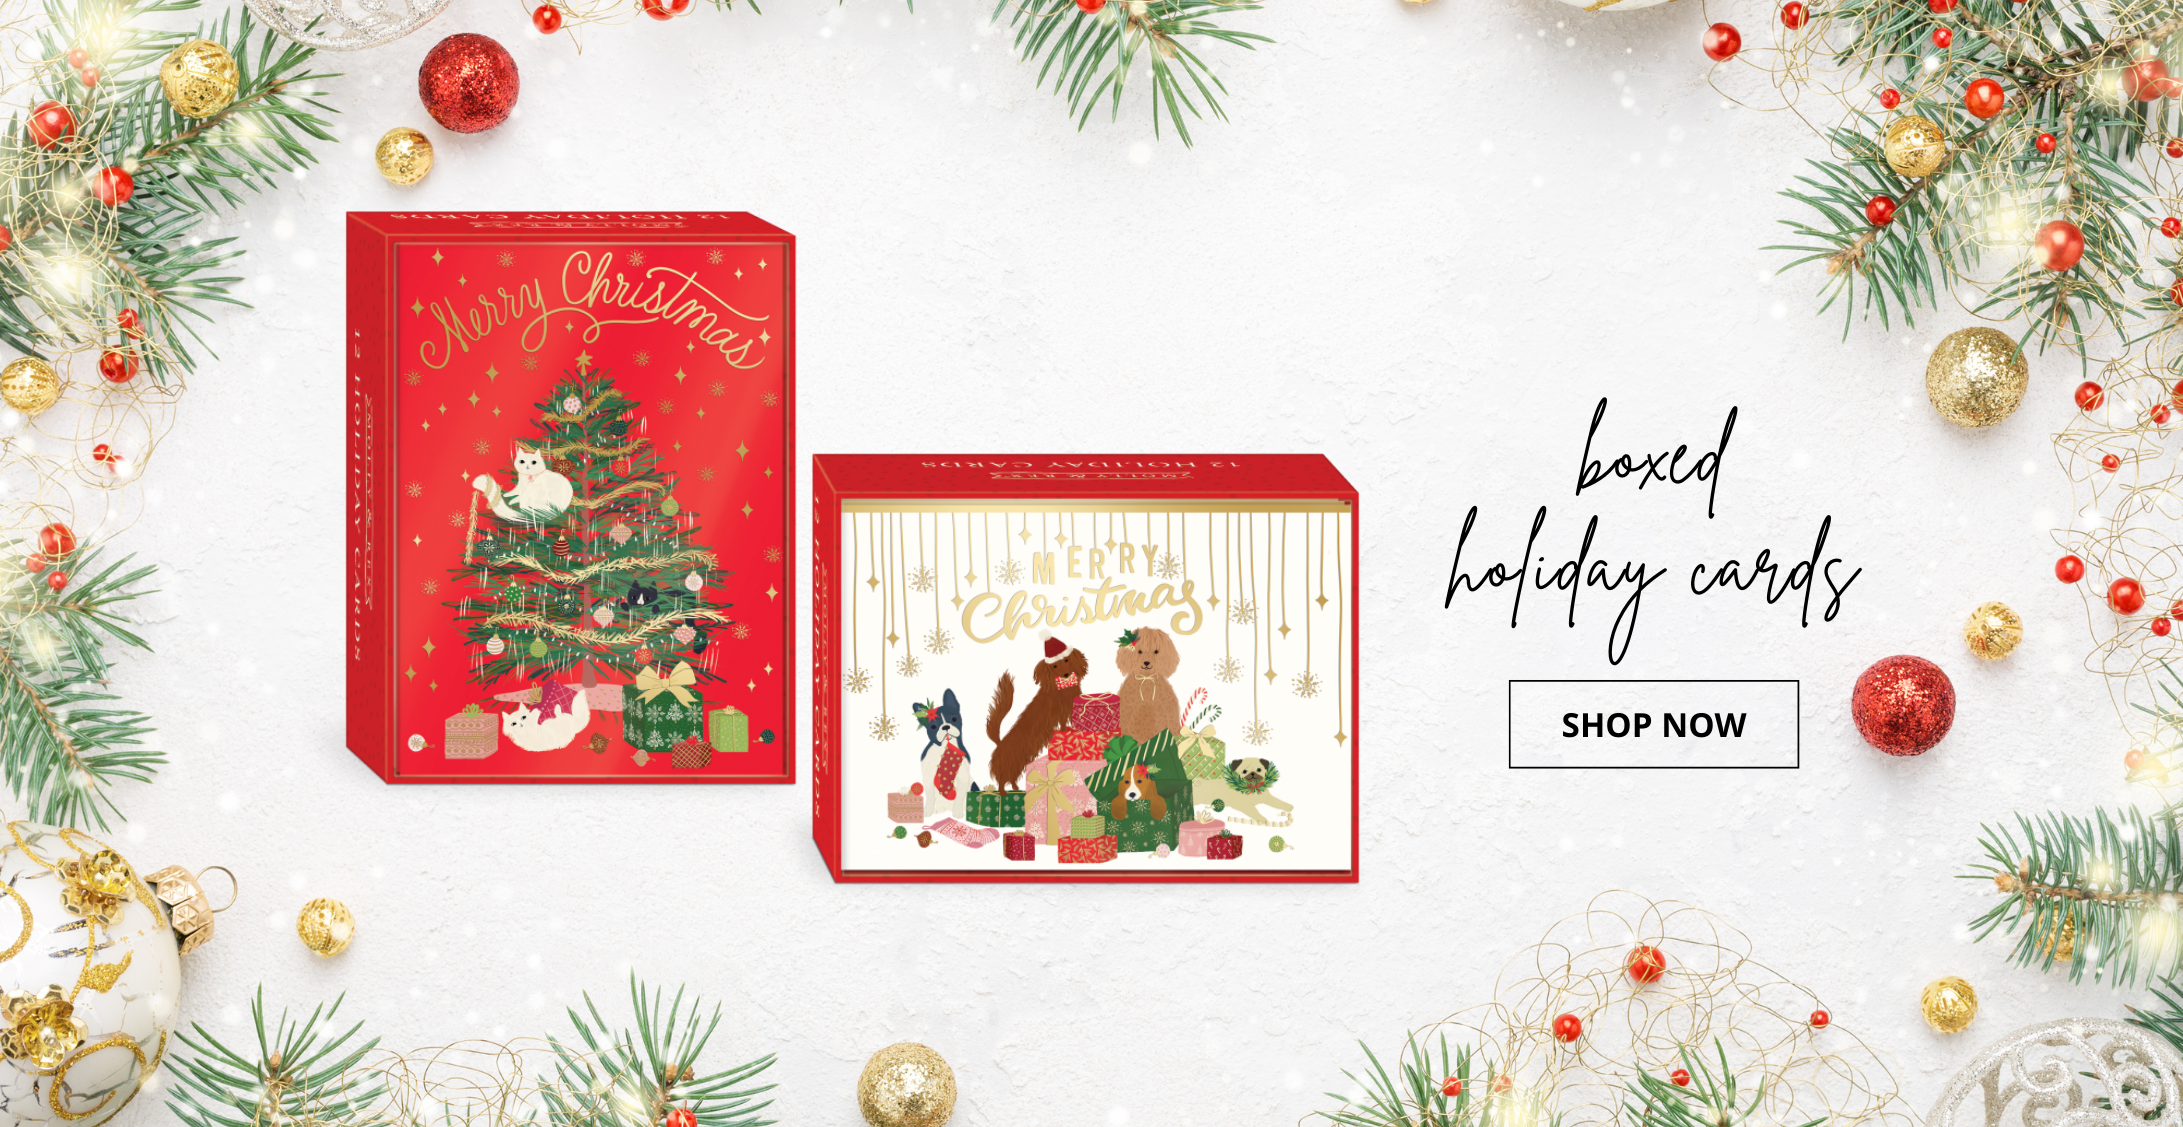   product category holiday boxed holiday cards 